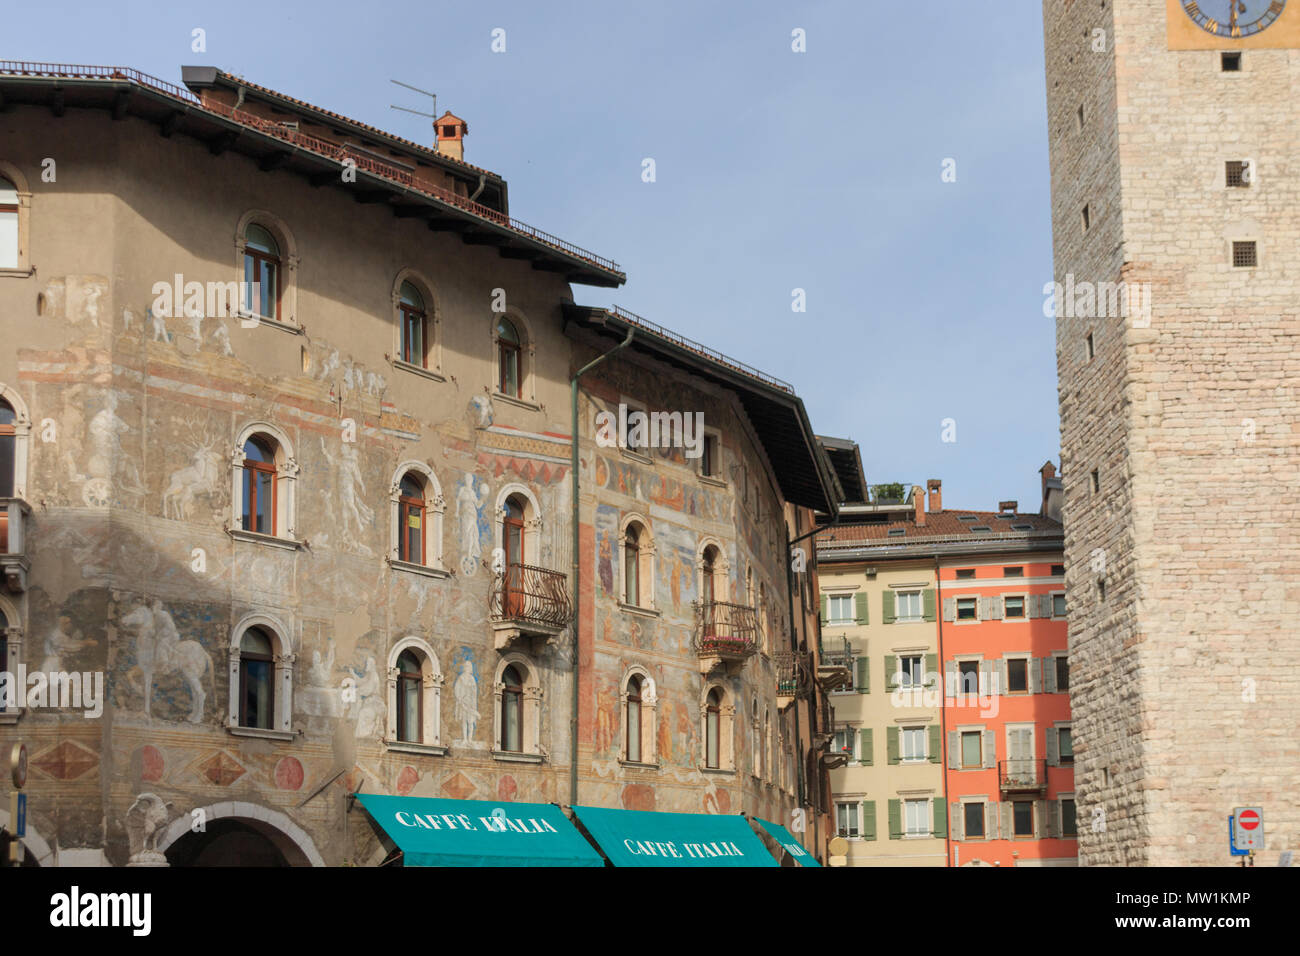 Trento, Italy – May 24, 2017: Case Cazuffi-Rella at Piazza Duomo in Trento, Italy. The palazzo from 16th Century with its famous frescoes by Renaissan Stock Photo